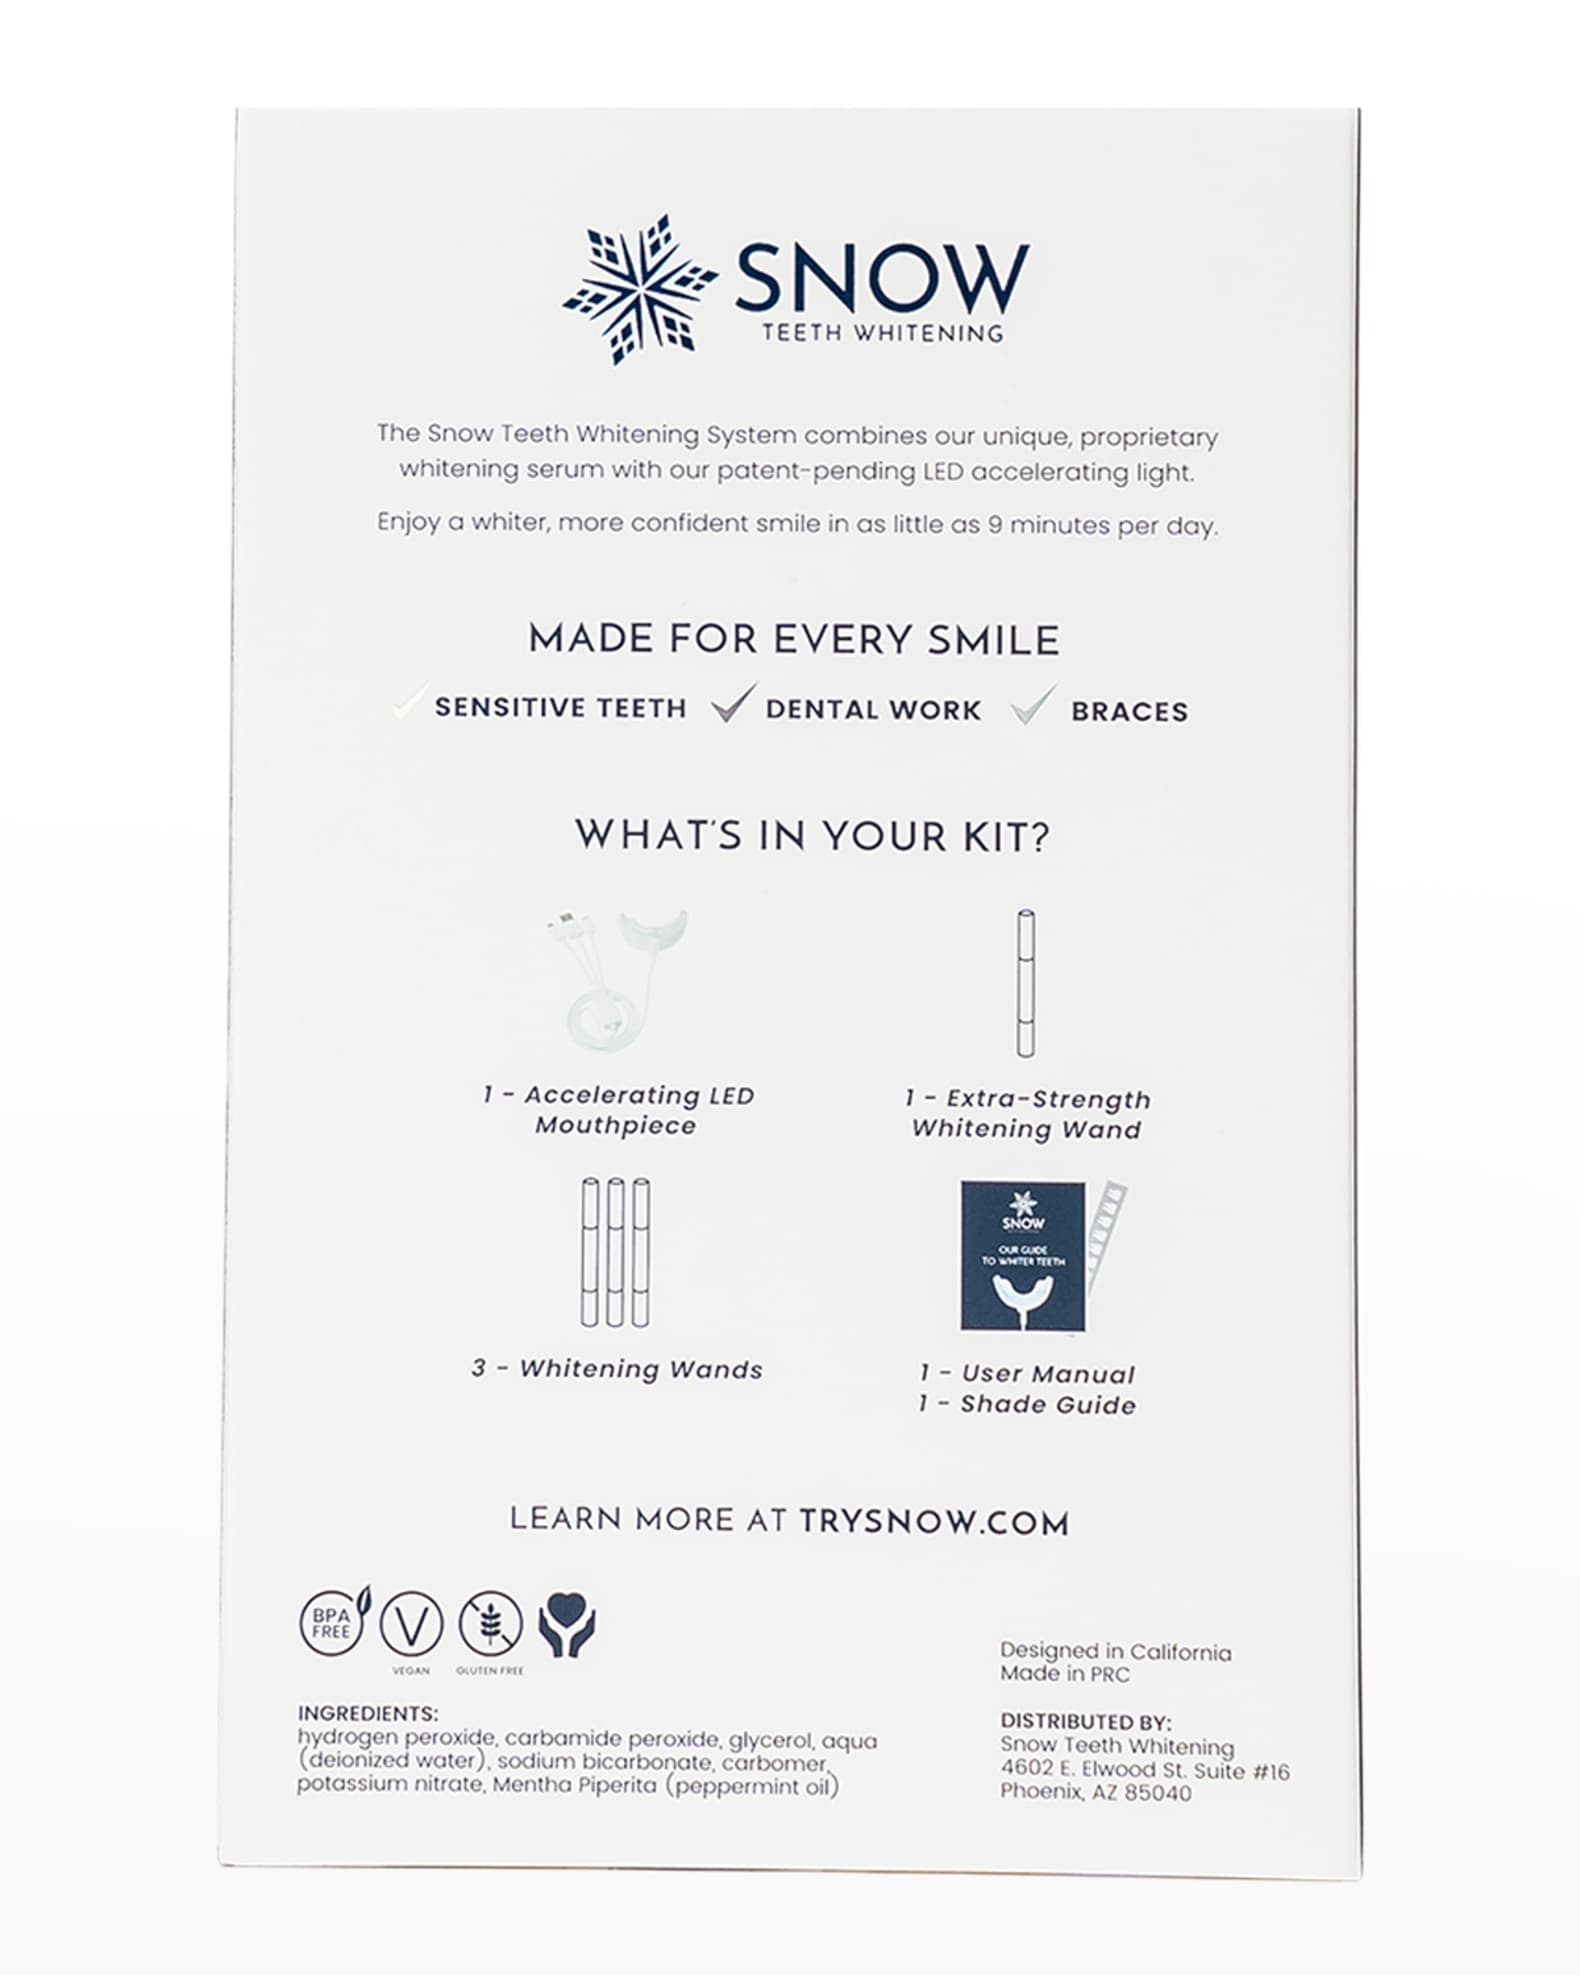 Snow Teeth Whitening Extra Strength - The Facts